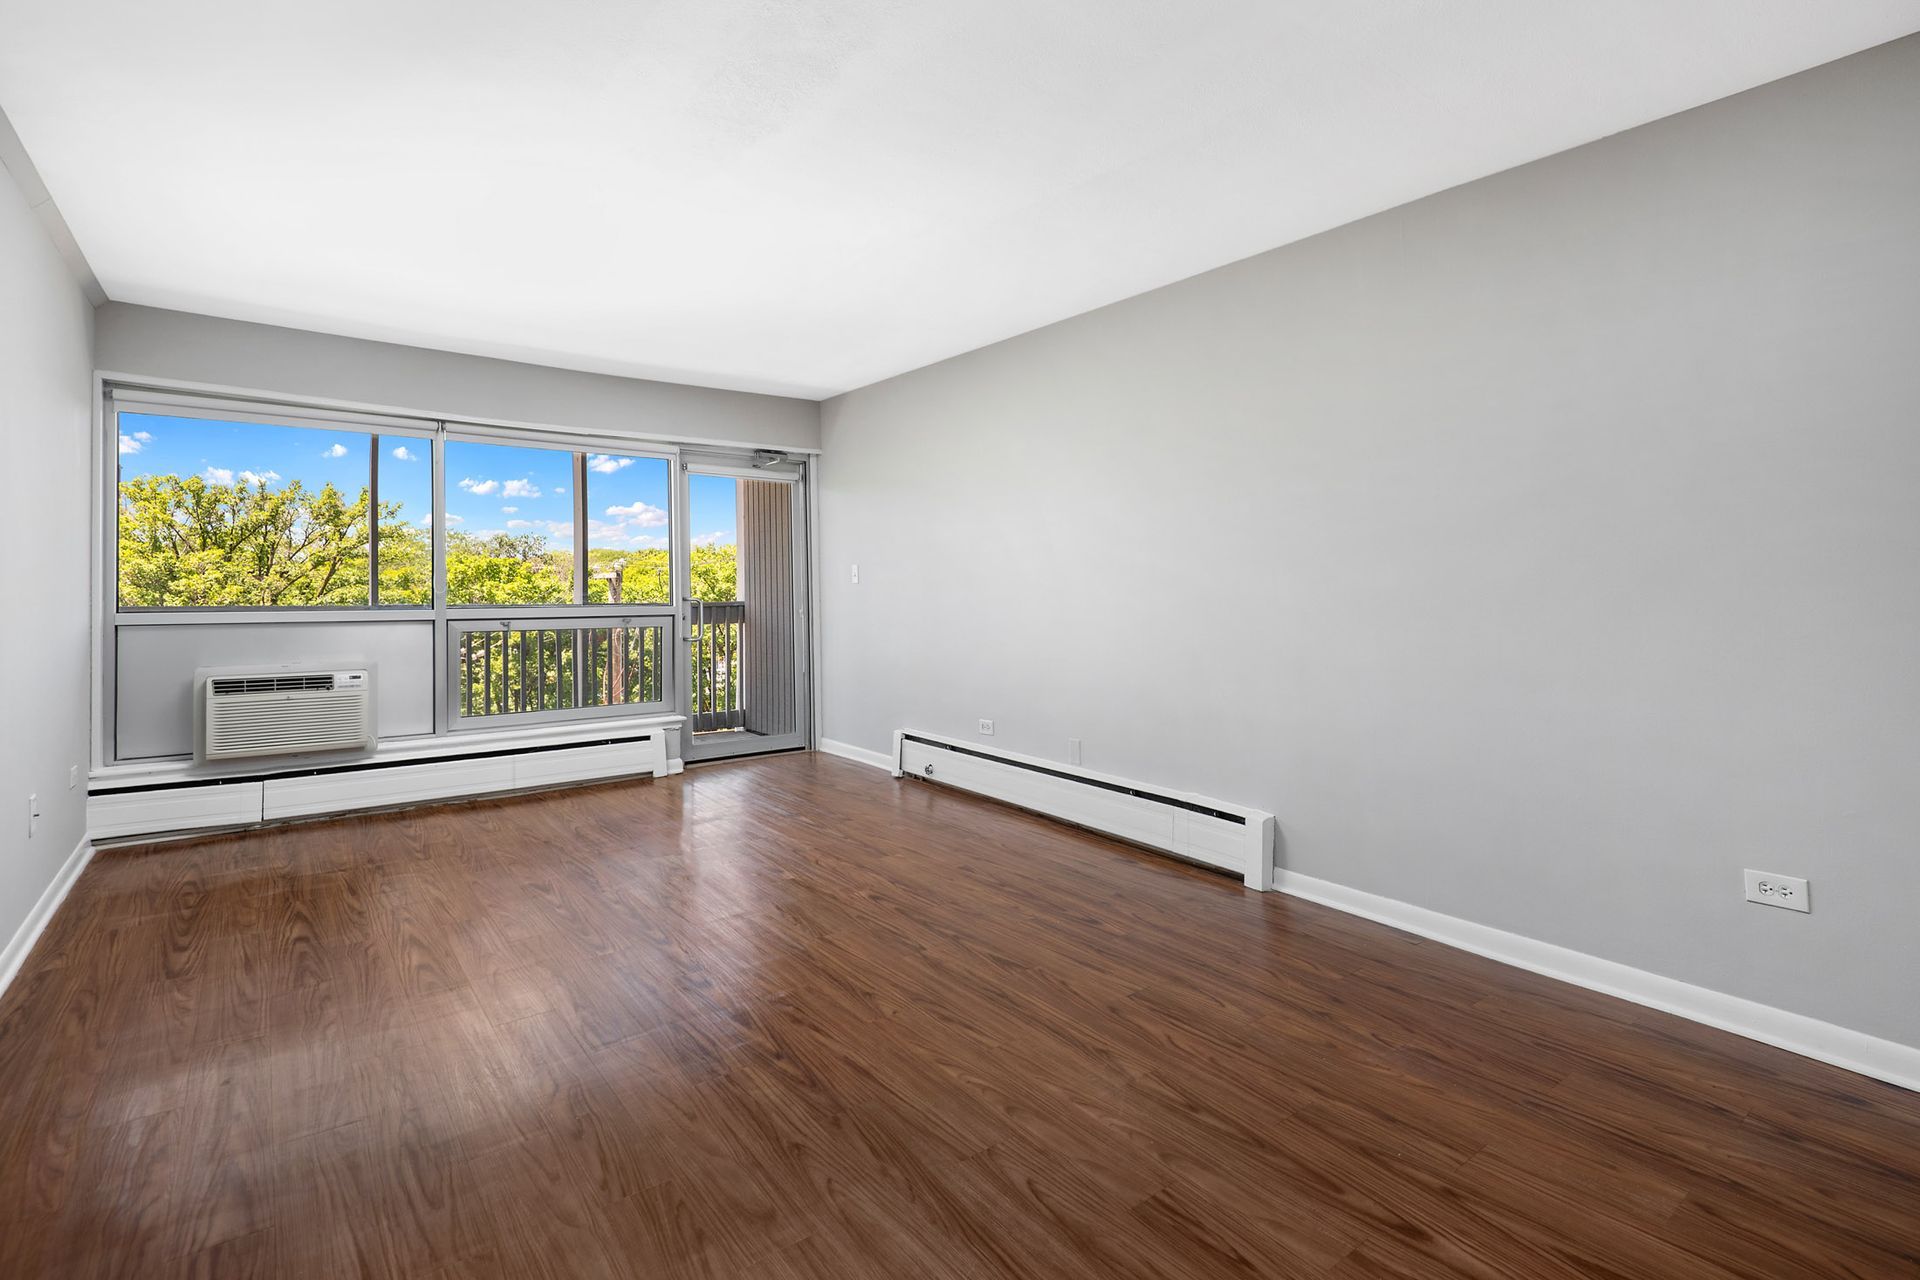 An empty living room with hardwood floors and a balcony at Reside on North Park.